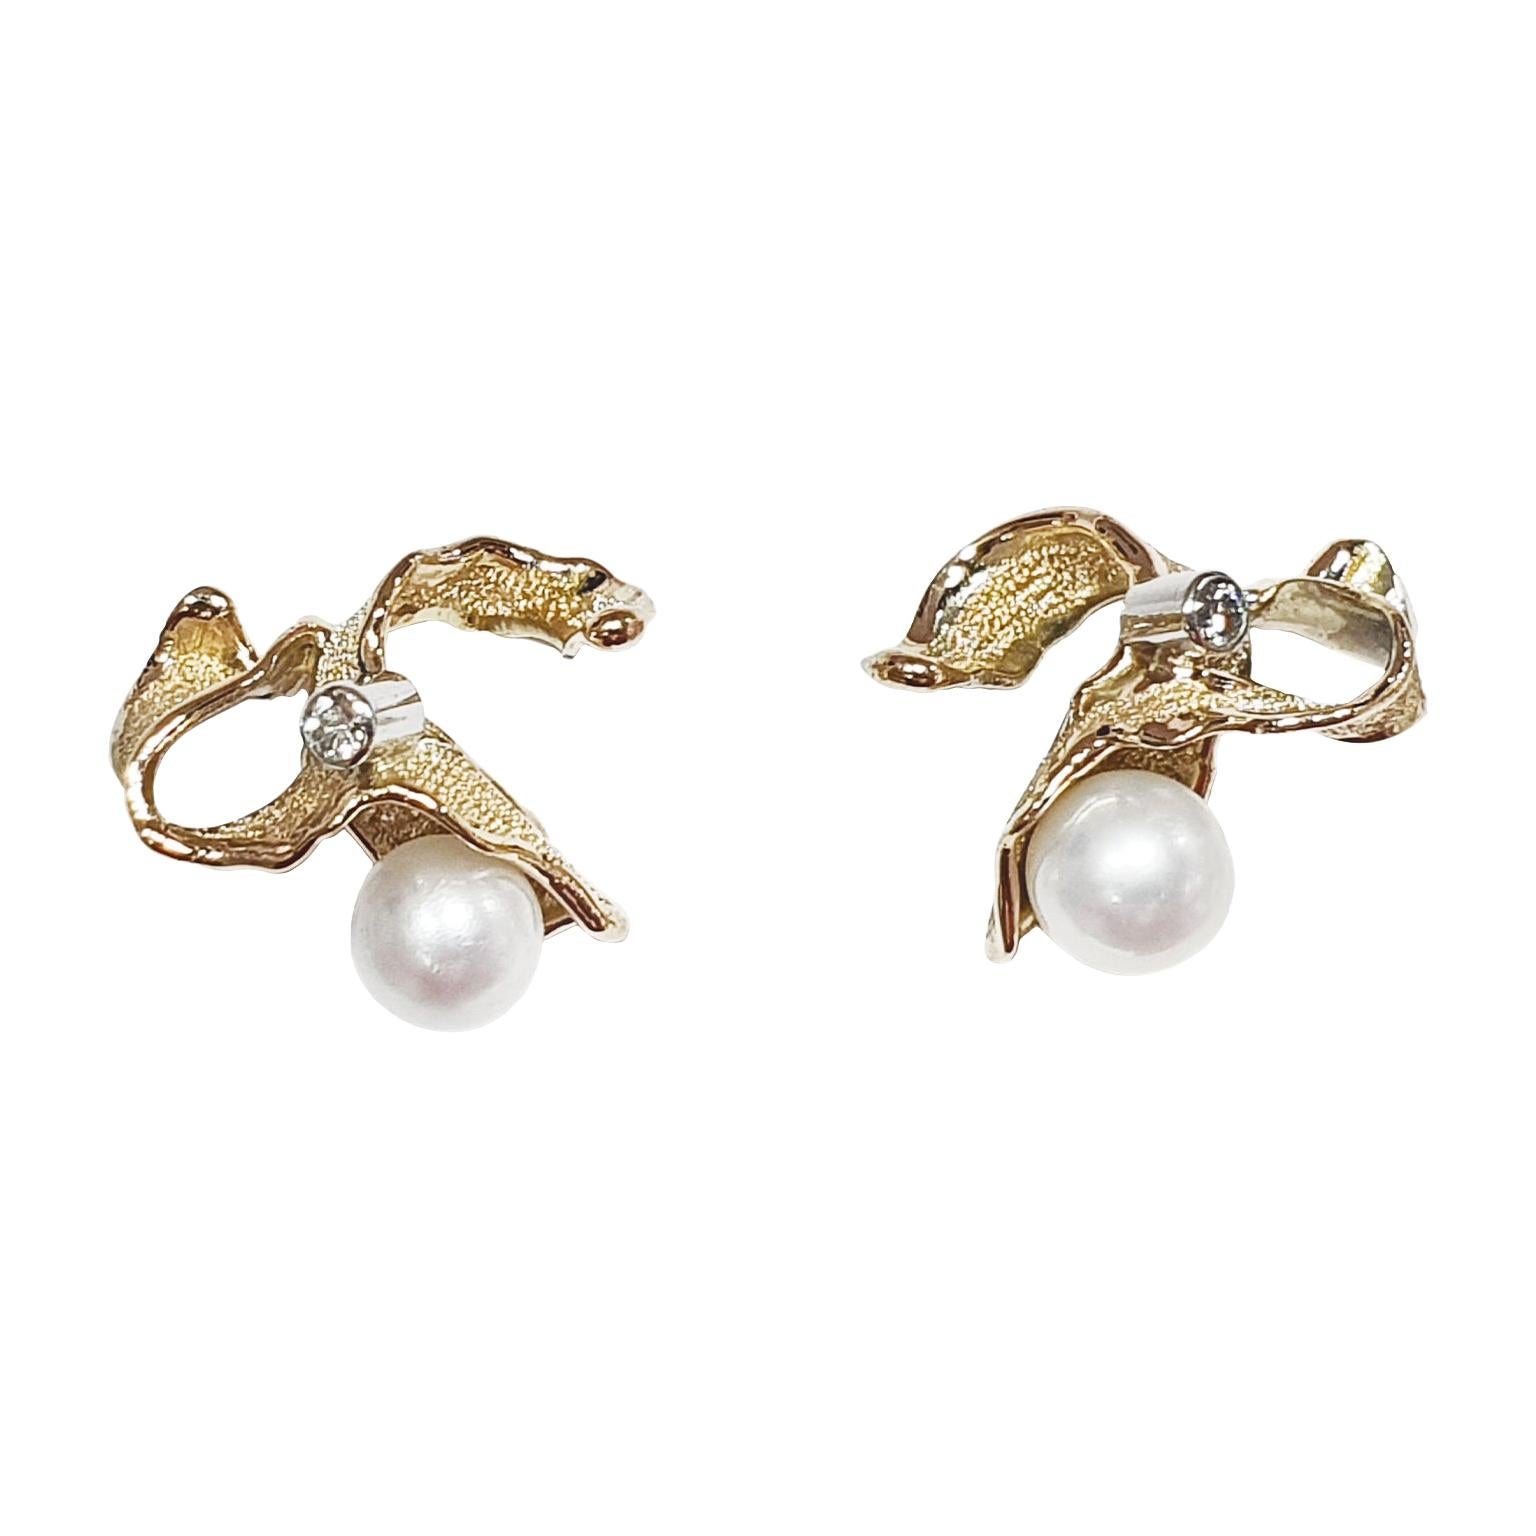 Paul Amey 9k Gold, Platinum and Freshwater Pearl "Orchid" Earrings For Sale